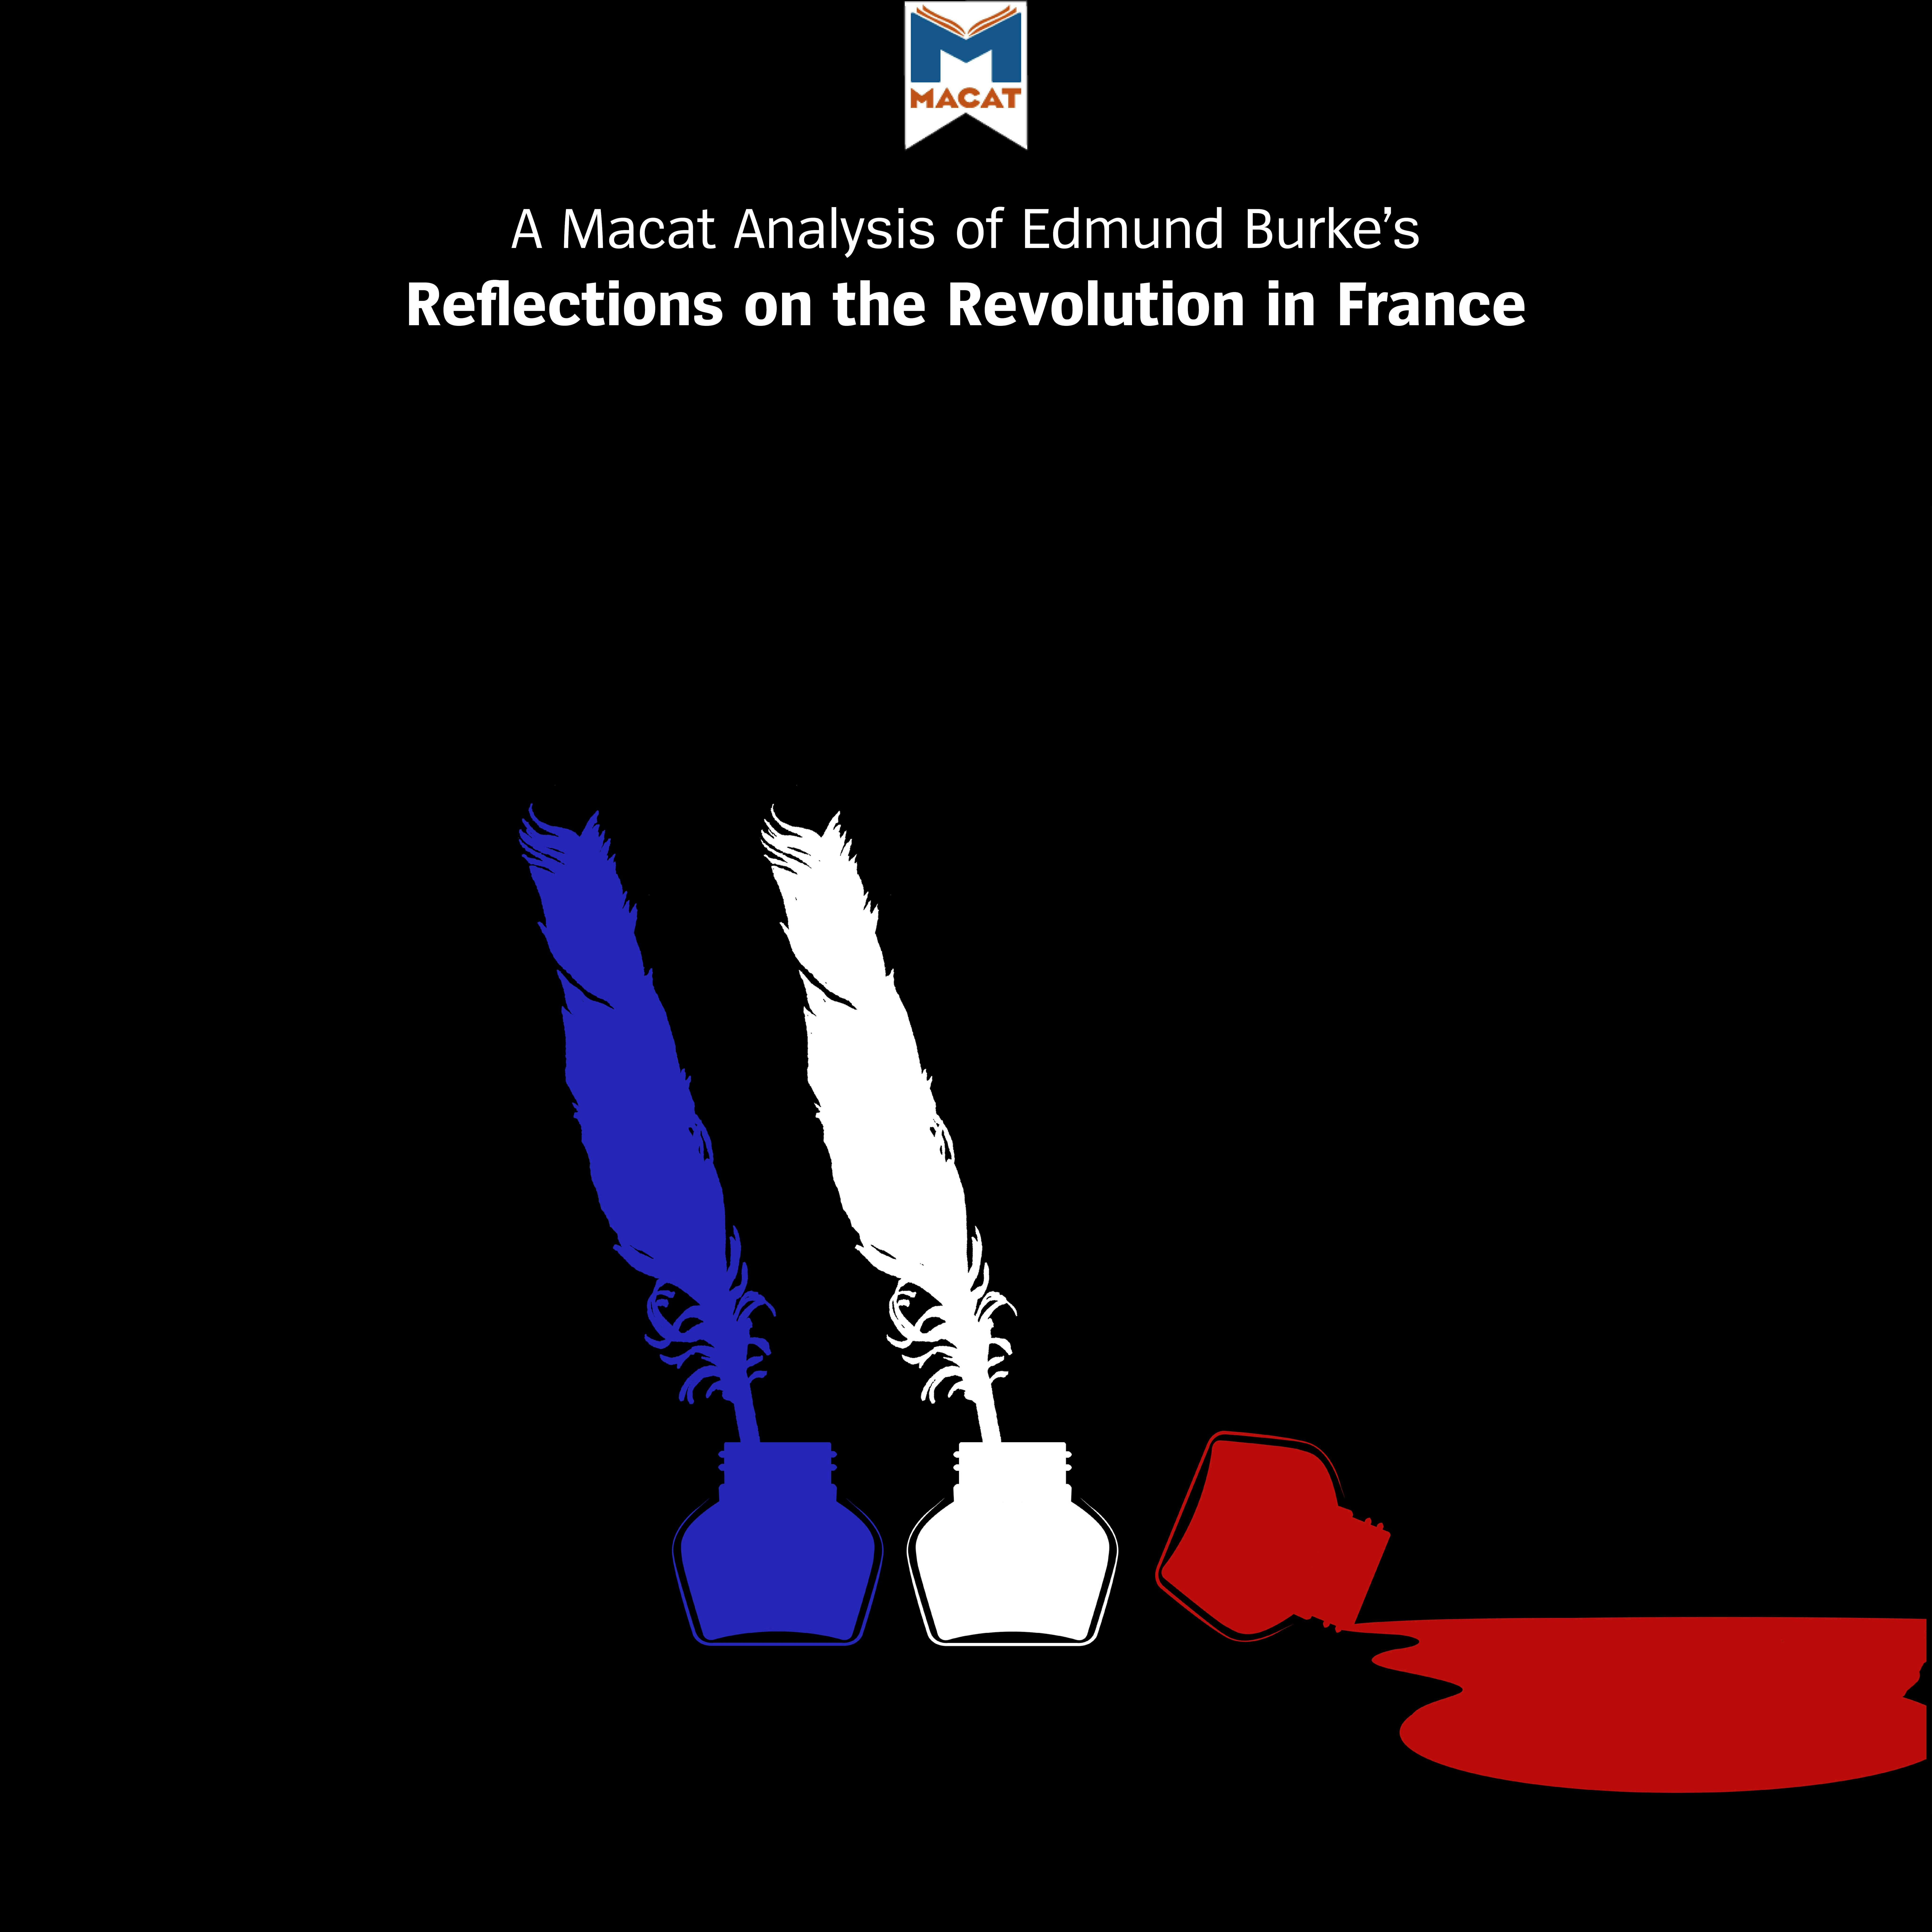 A Macat Analysis of Edmund Burke's Reflections on the Revolution in France - undefined